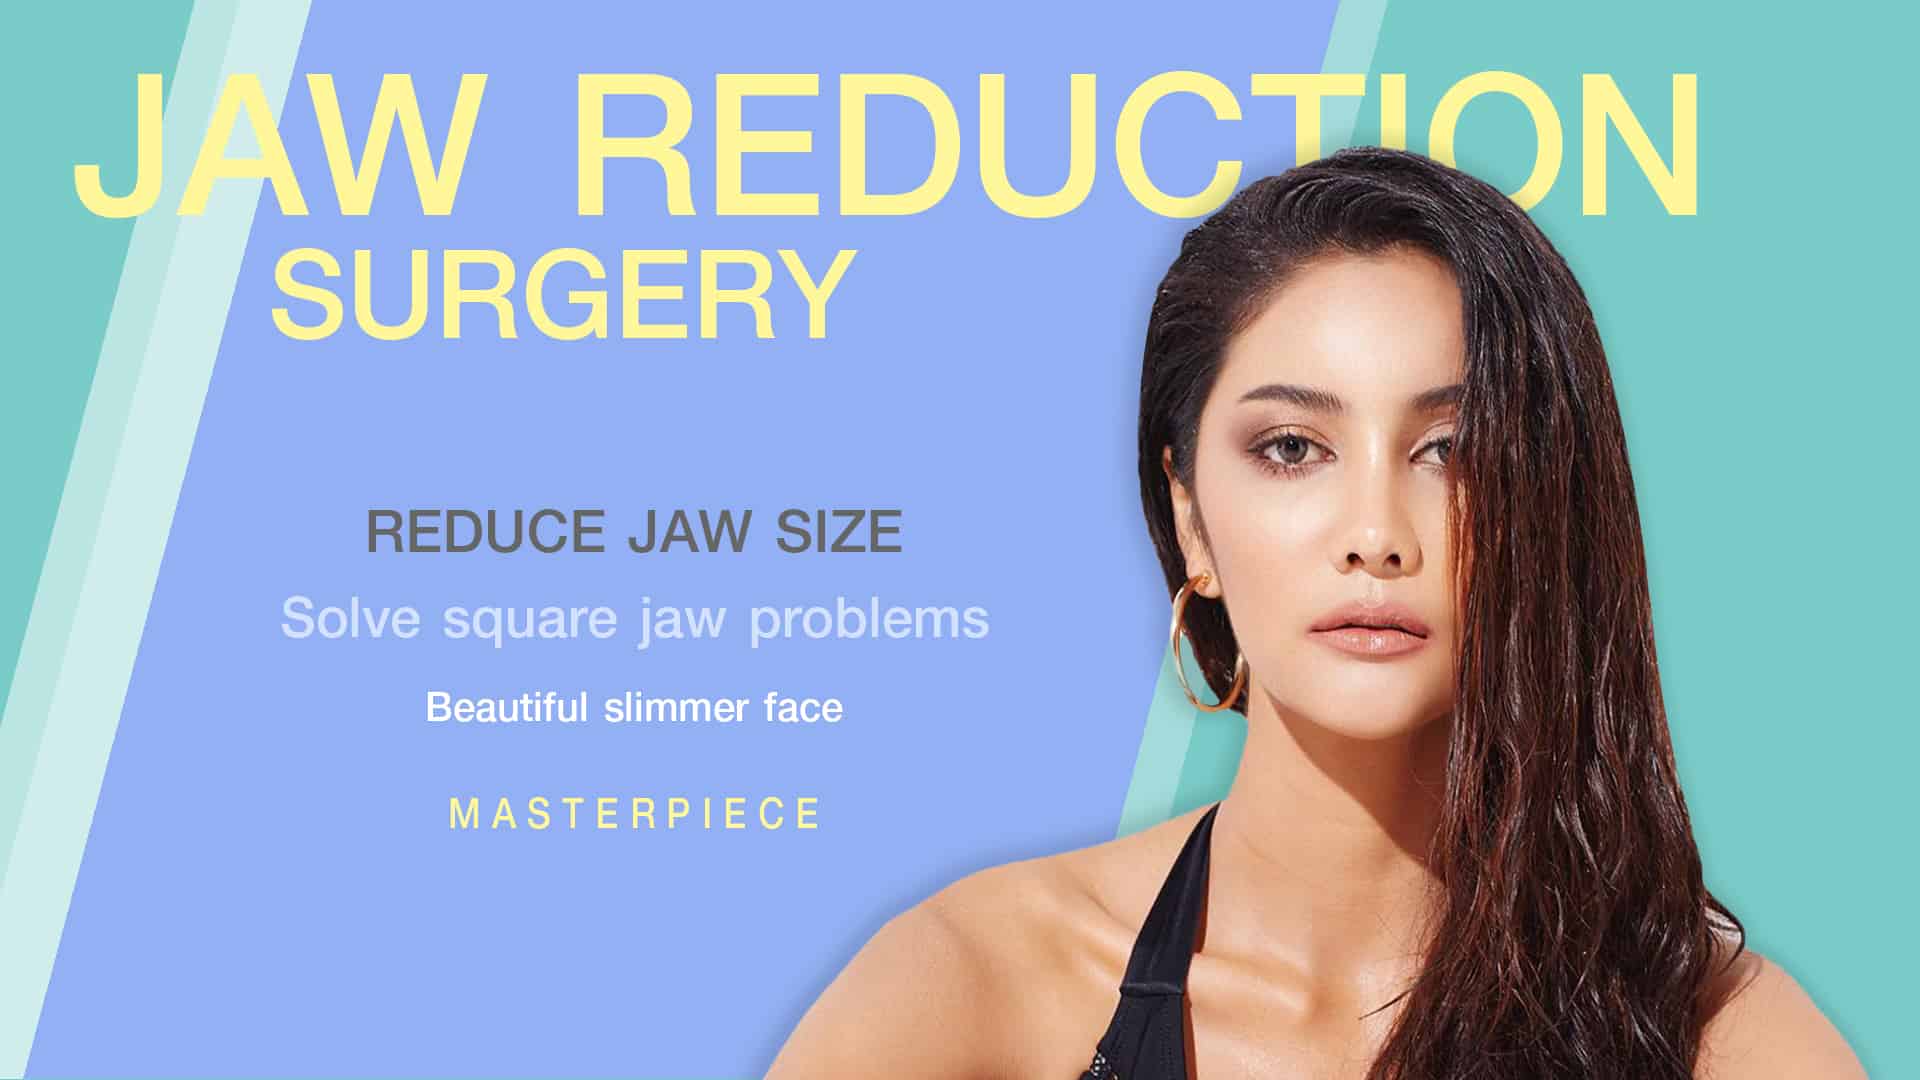 Jaw reduction surgery